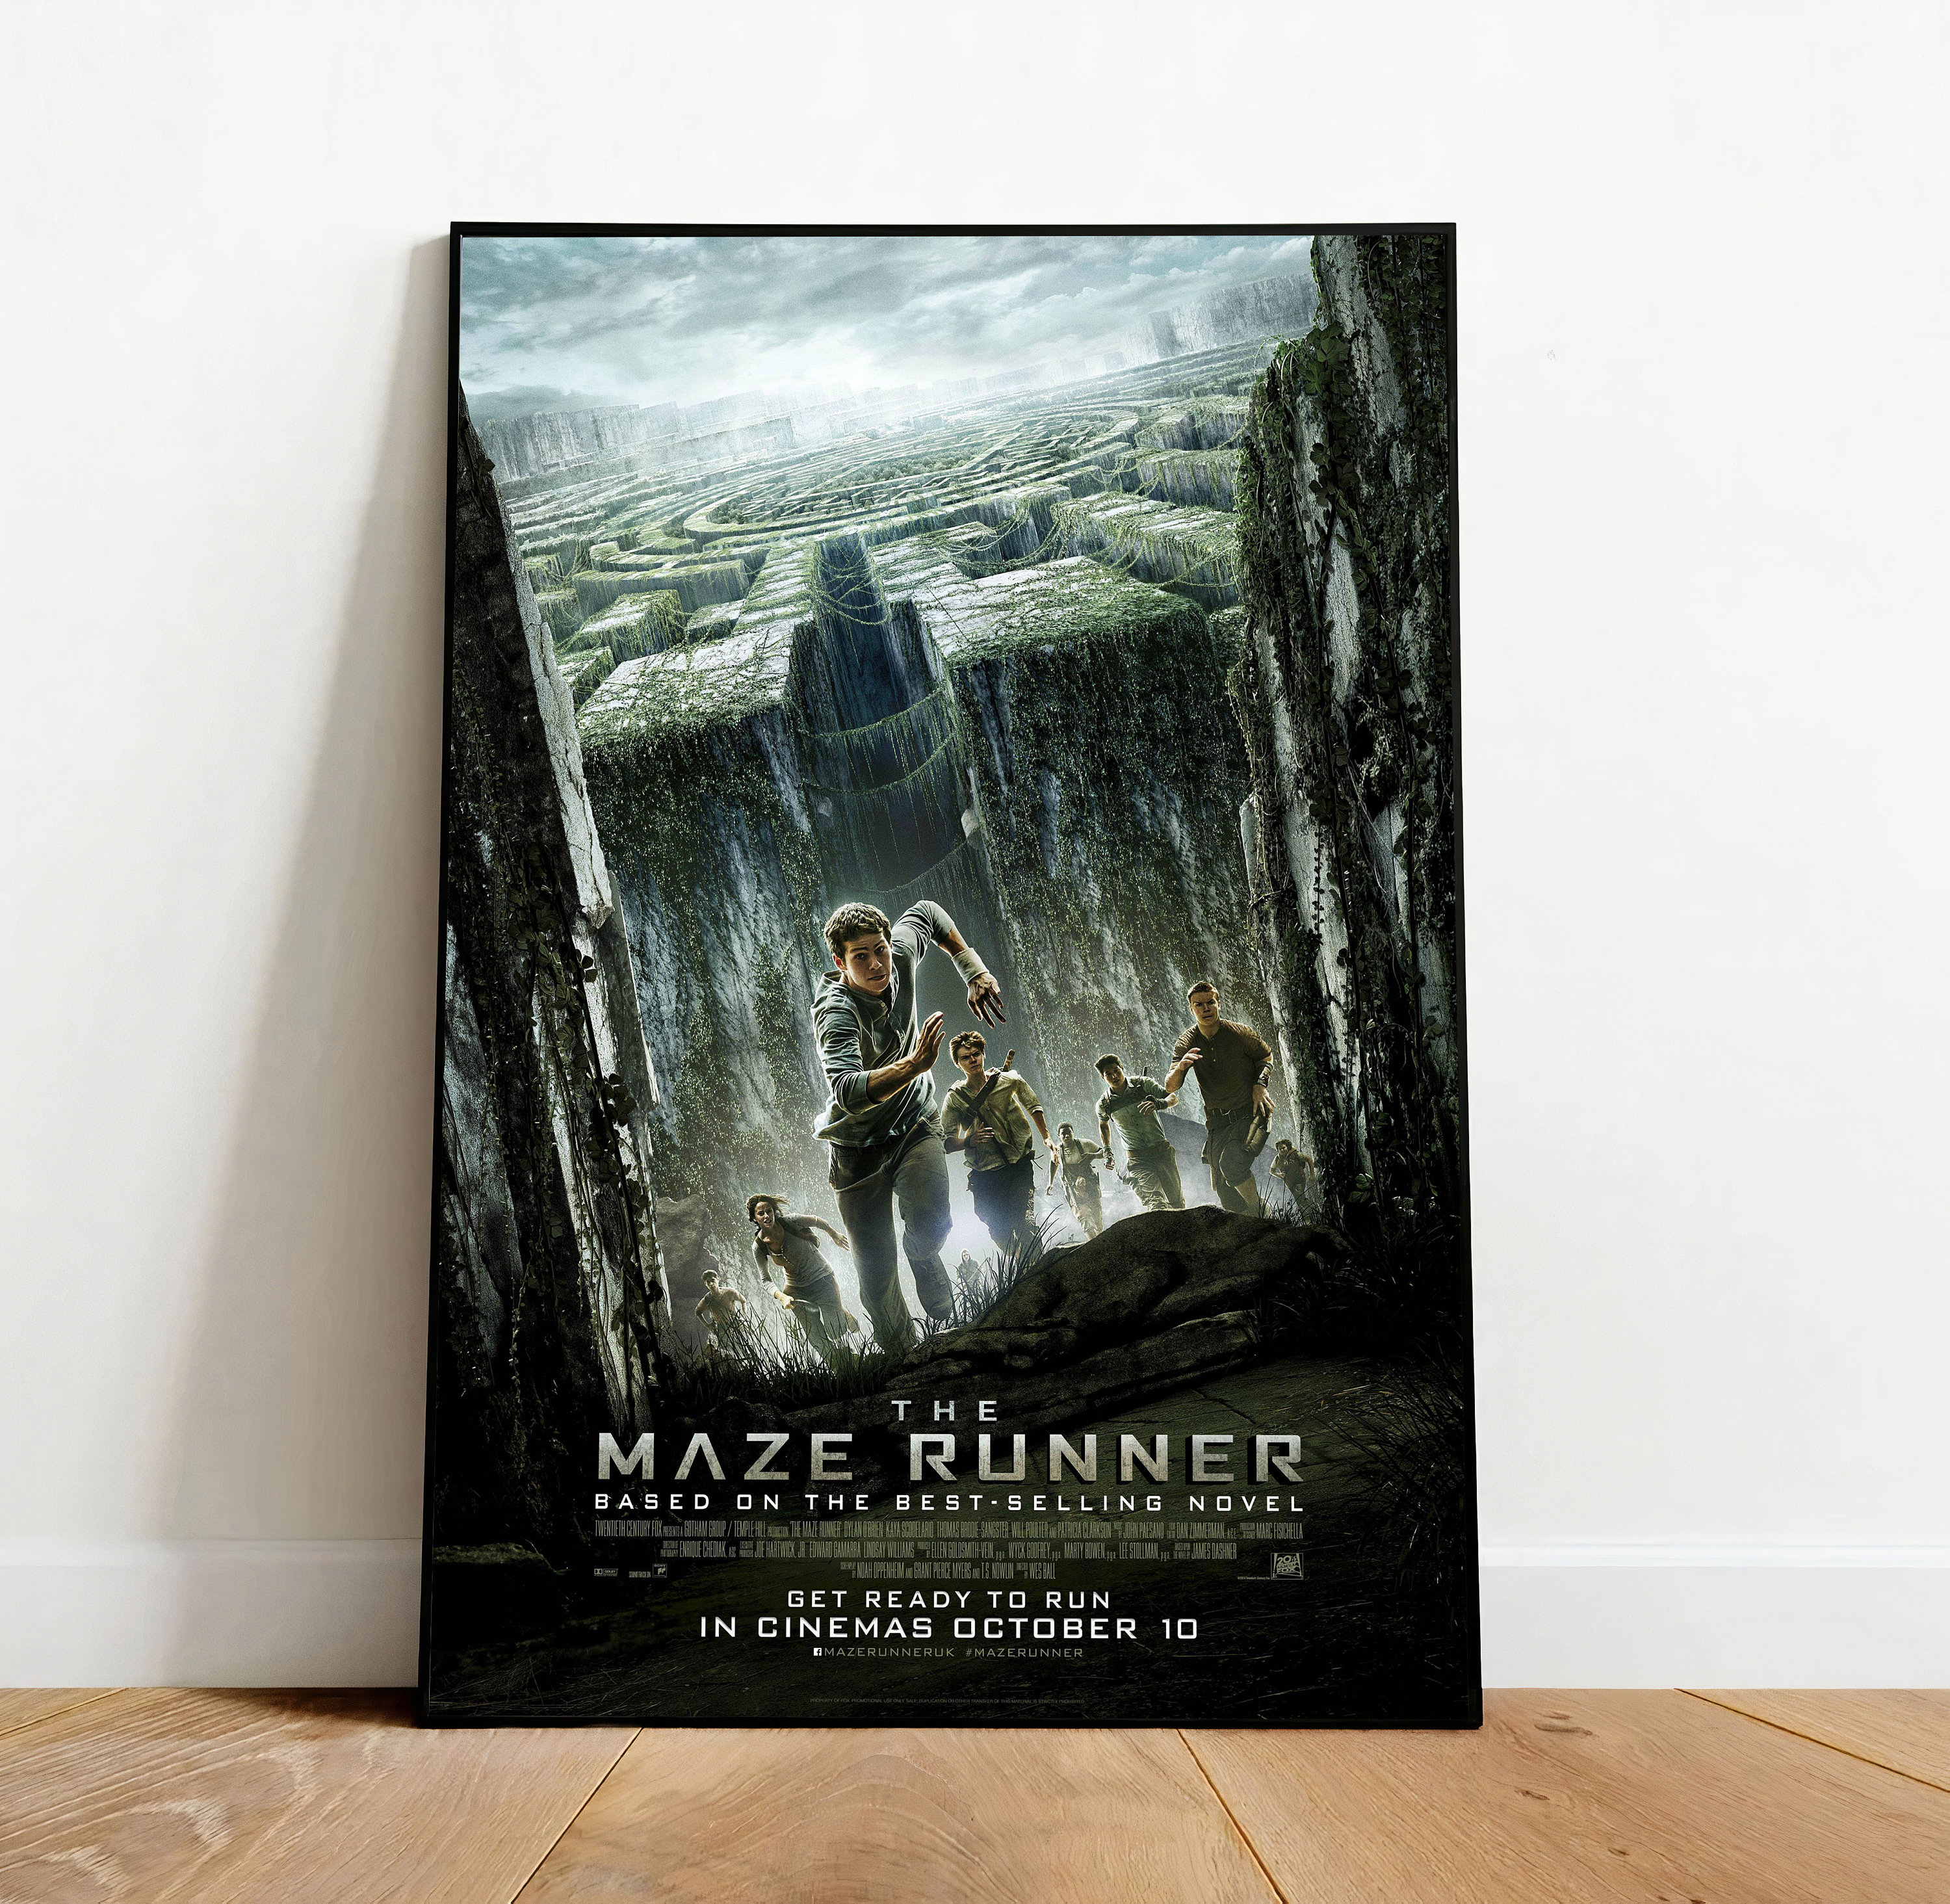 THE MAZE RUNNER CAST SIGNED AUTOGRAPHED 10X 8 RE - PHOTO PRINT O'Brien  Poulter